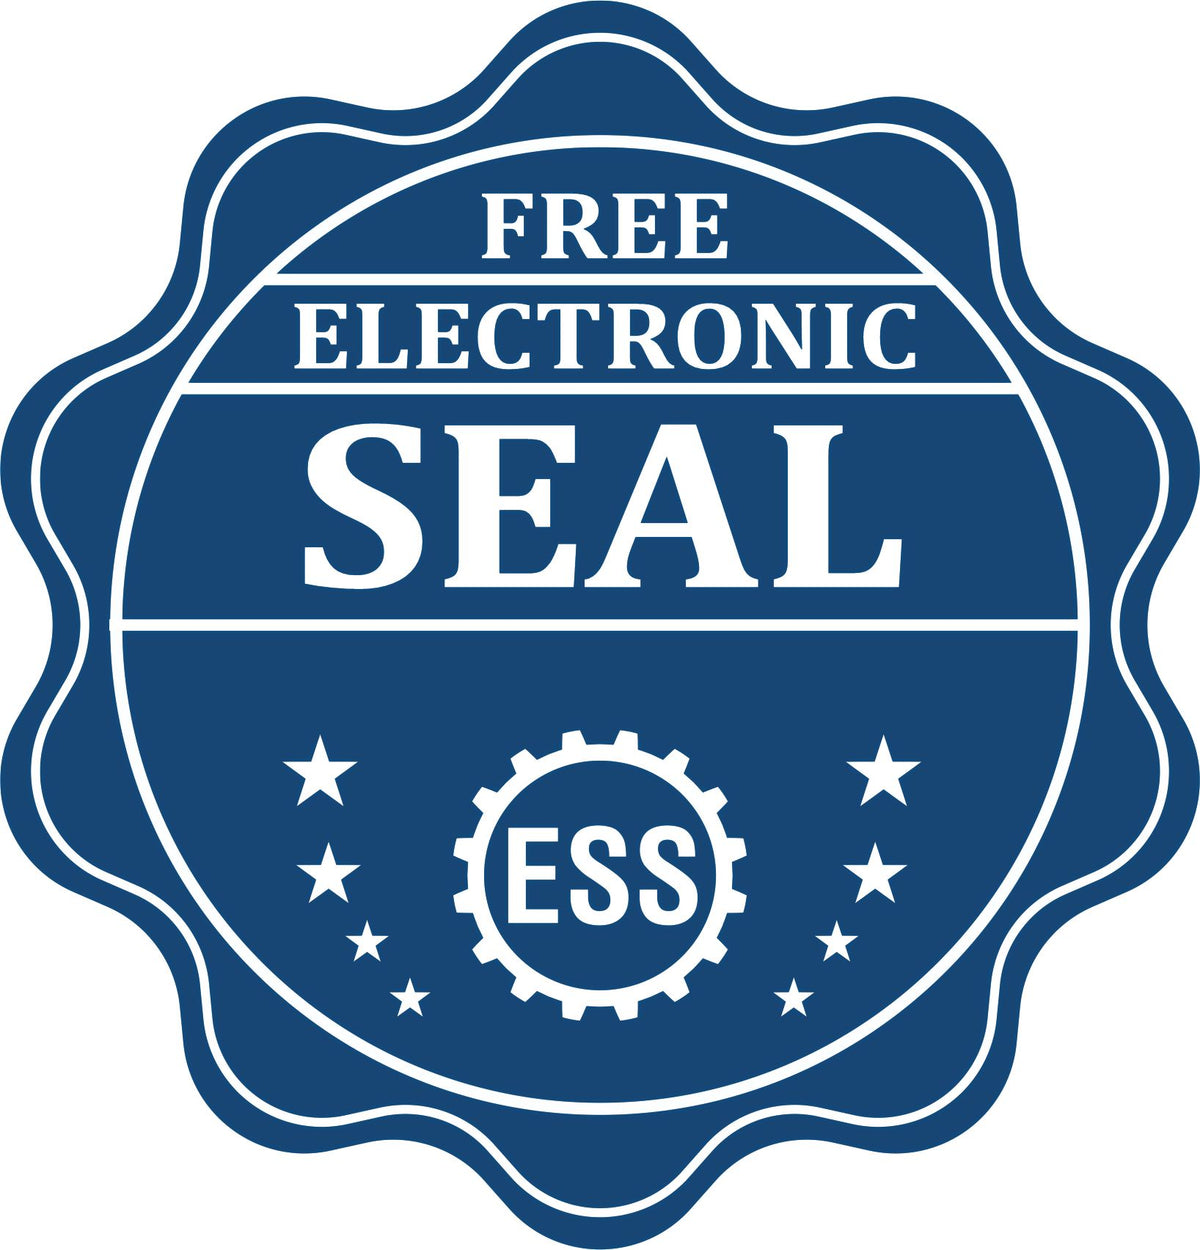 A badge showing a free electronic seal for the Handheld Missouri Land Surveyor Seal with stars and the ESS gear on the emblem.